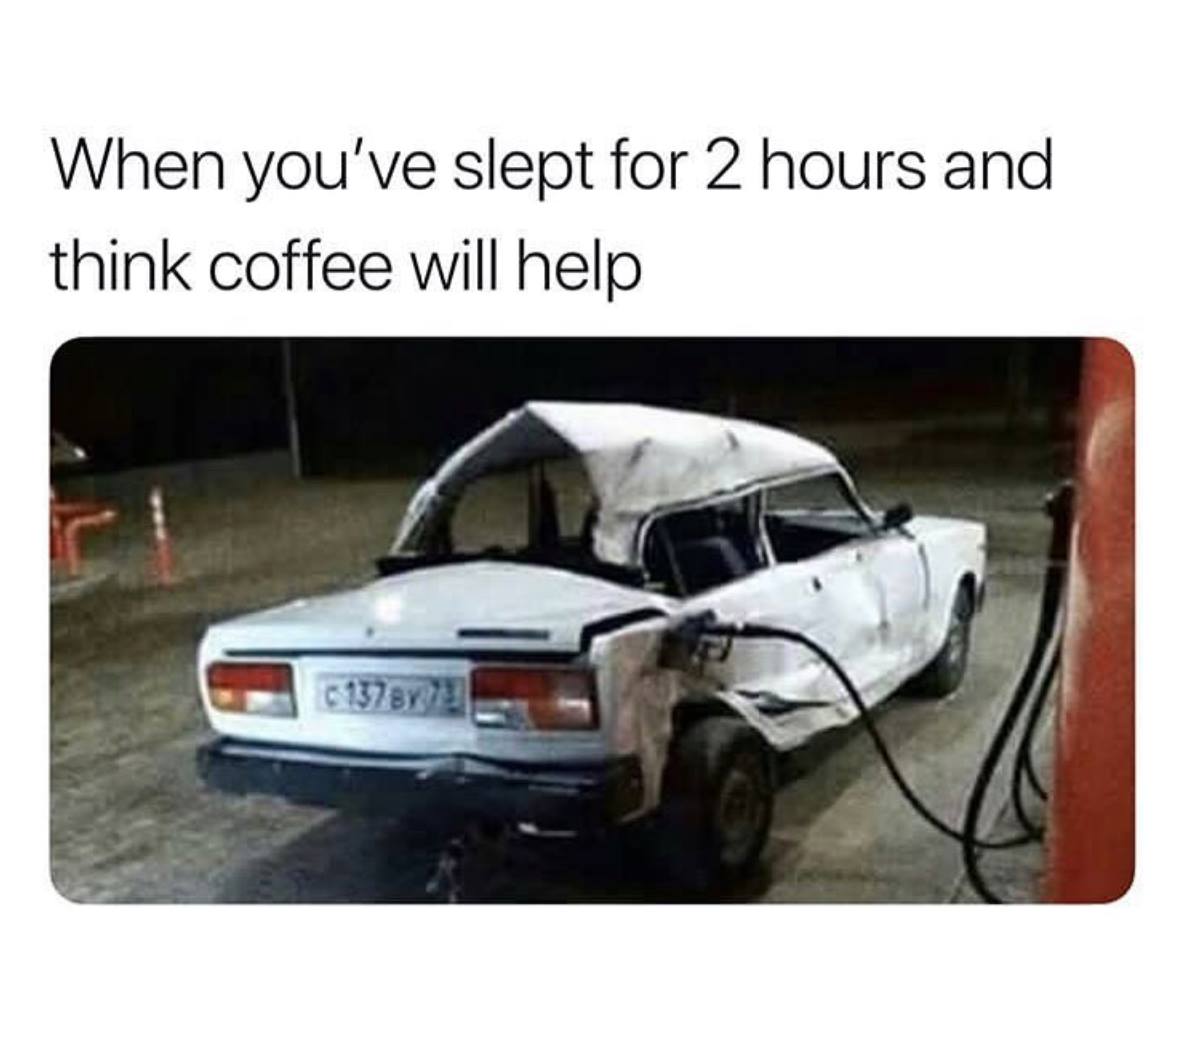 you ve slept for 2 hours meme - When you've slept for 2 hours and think coffee will help 1378